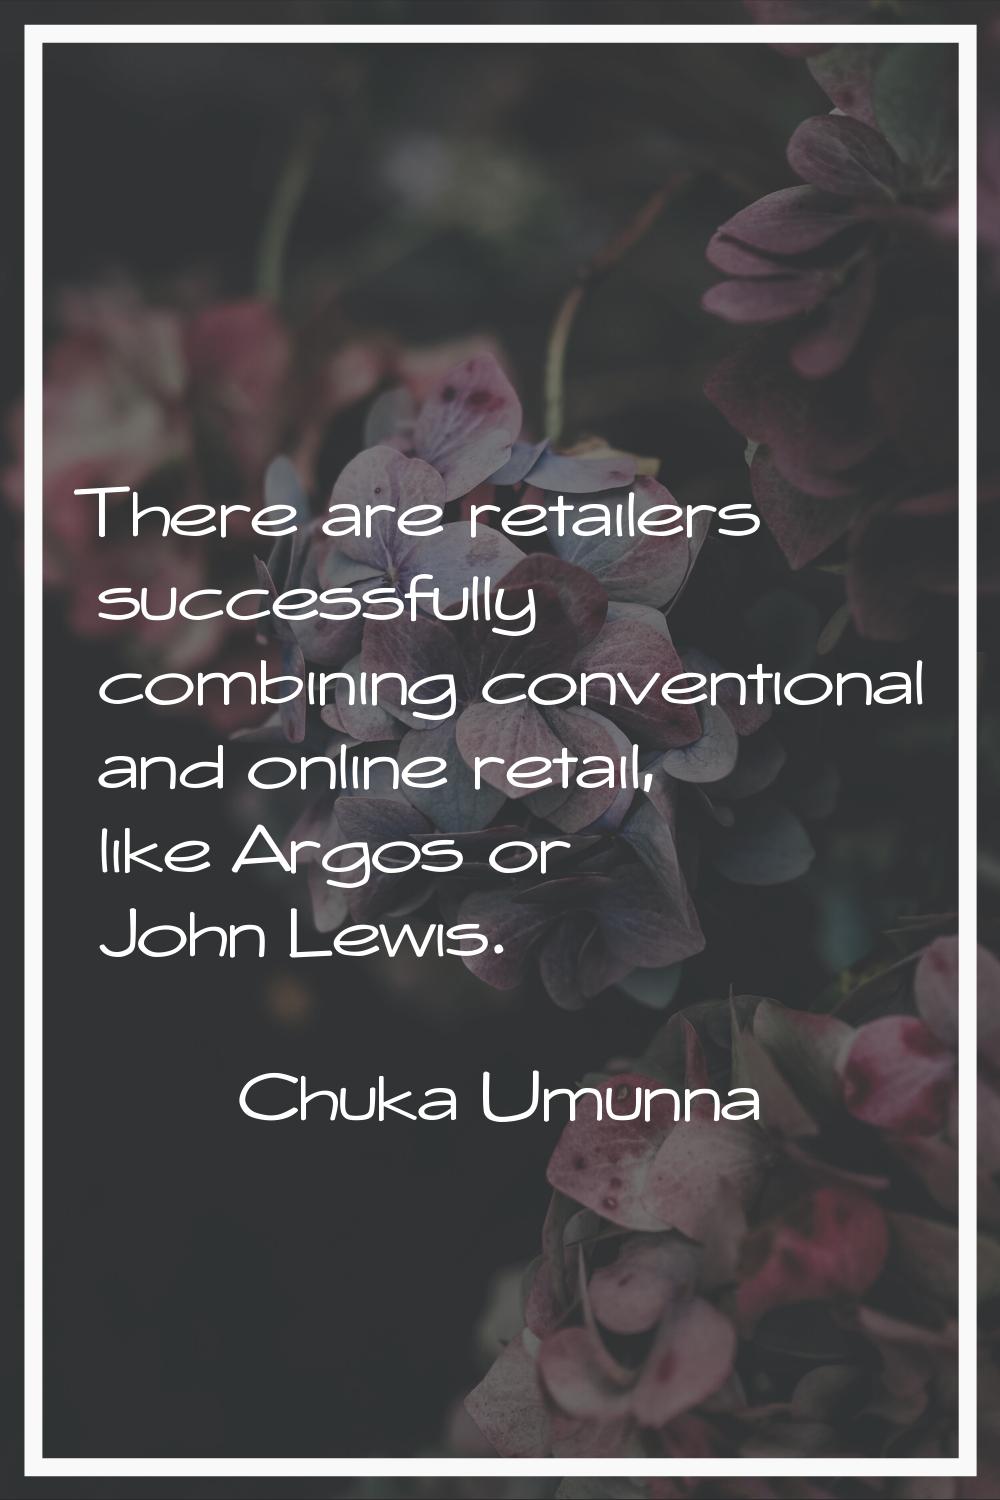 There are retailers successfully combining conventional and online retail, like Argos or John Lewis